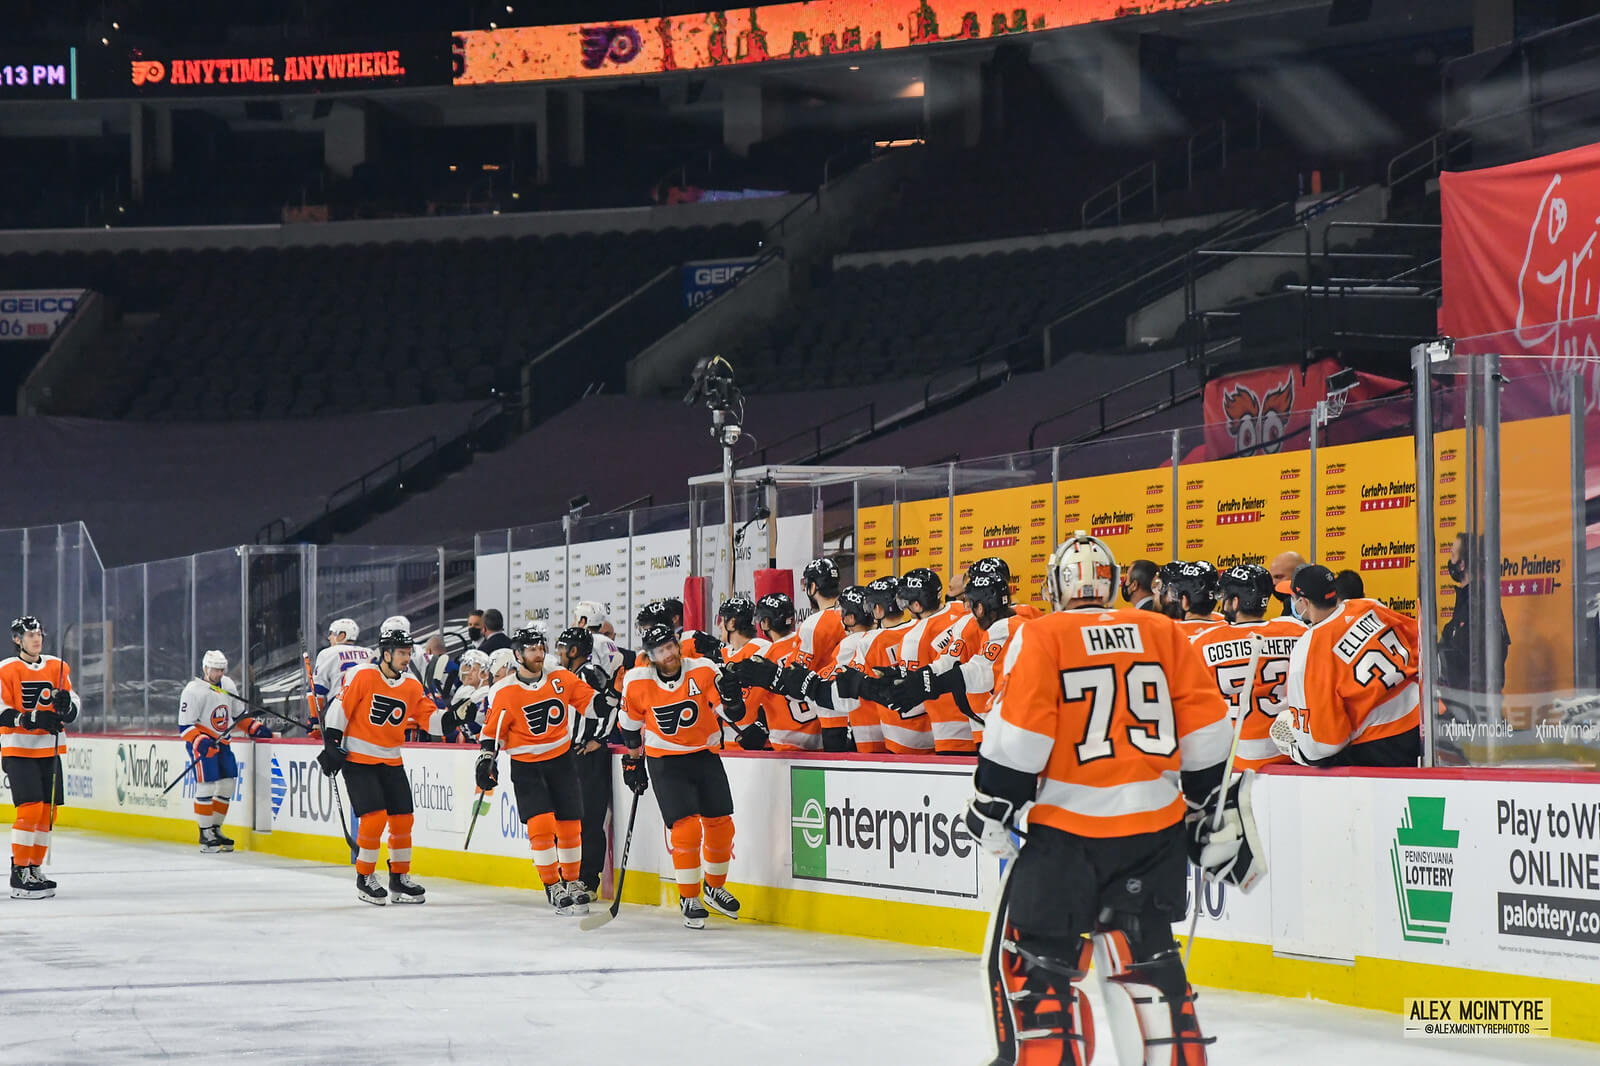 ESPN writer calls out Flyers player for wearing jersey to support